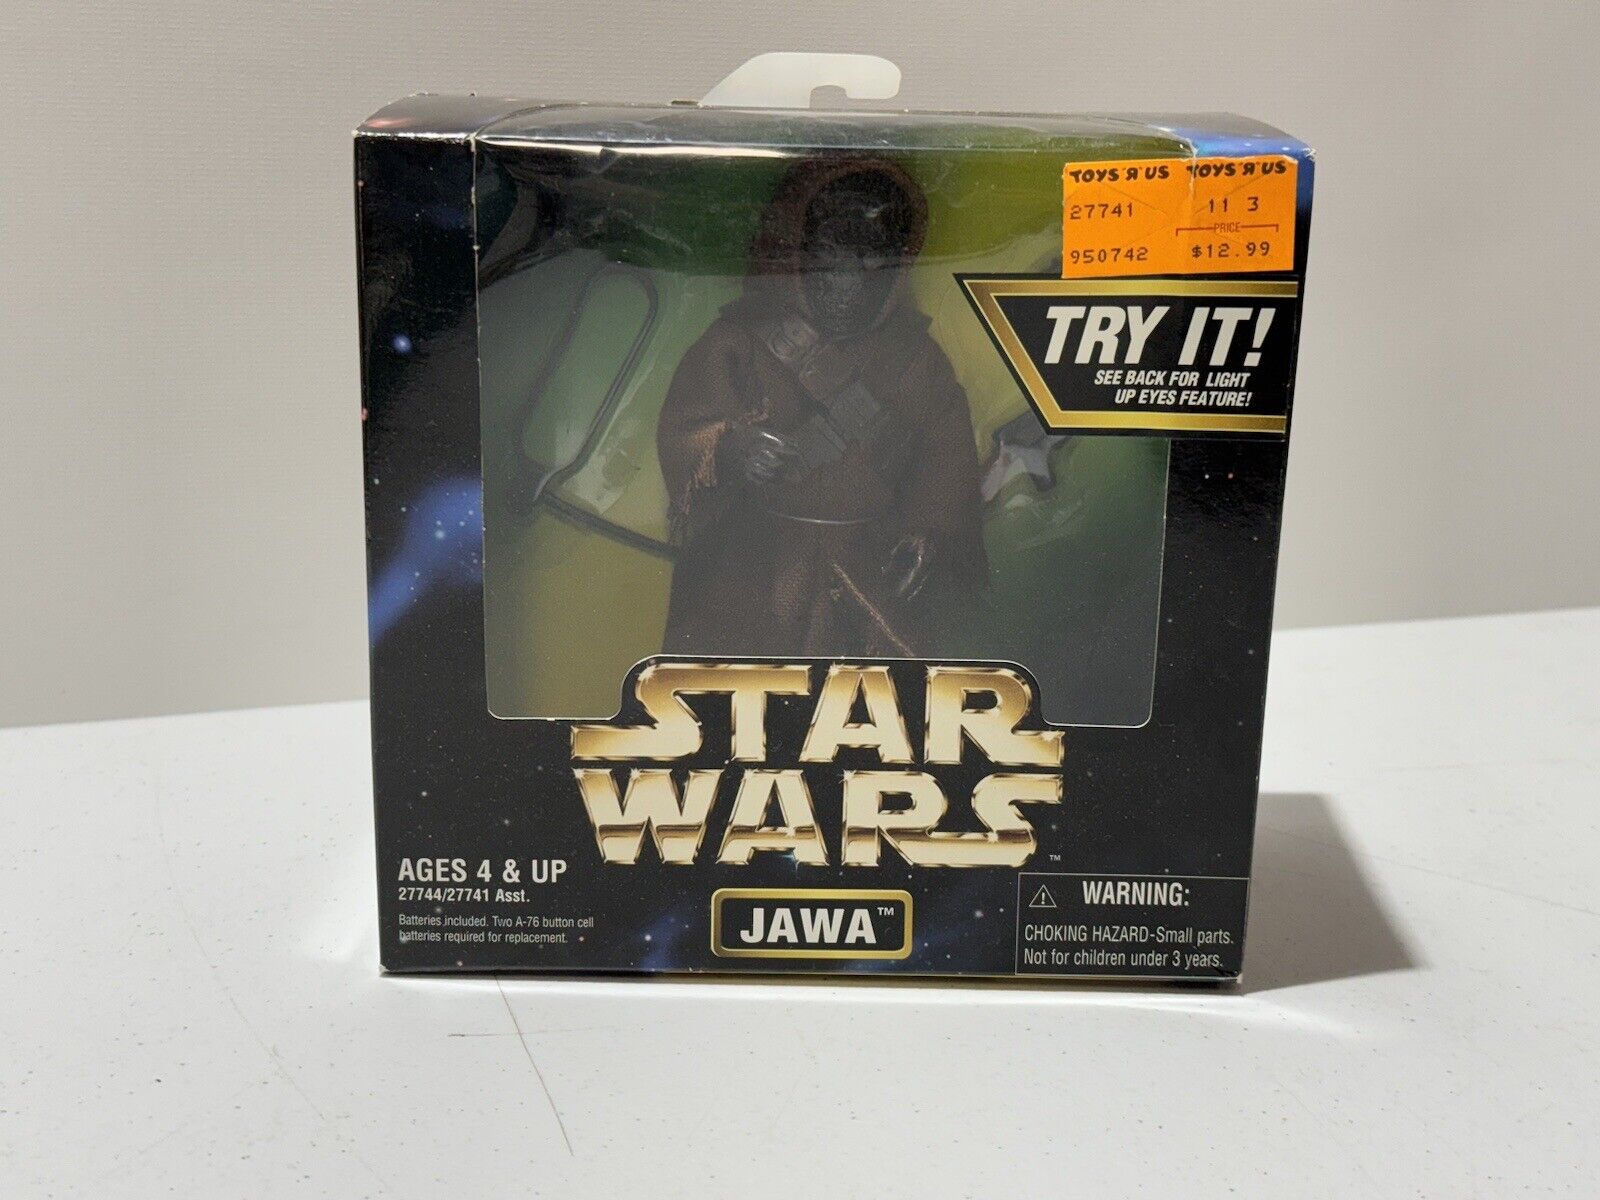 Star Wars Action Collection Jawa 6” Action Figure 1997 Kenner— NEW IN BOX Sealed